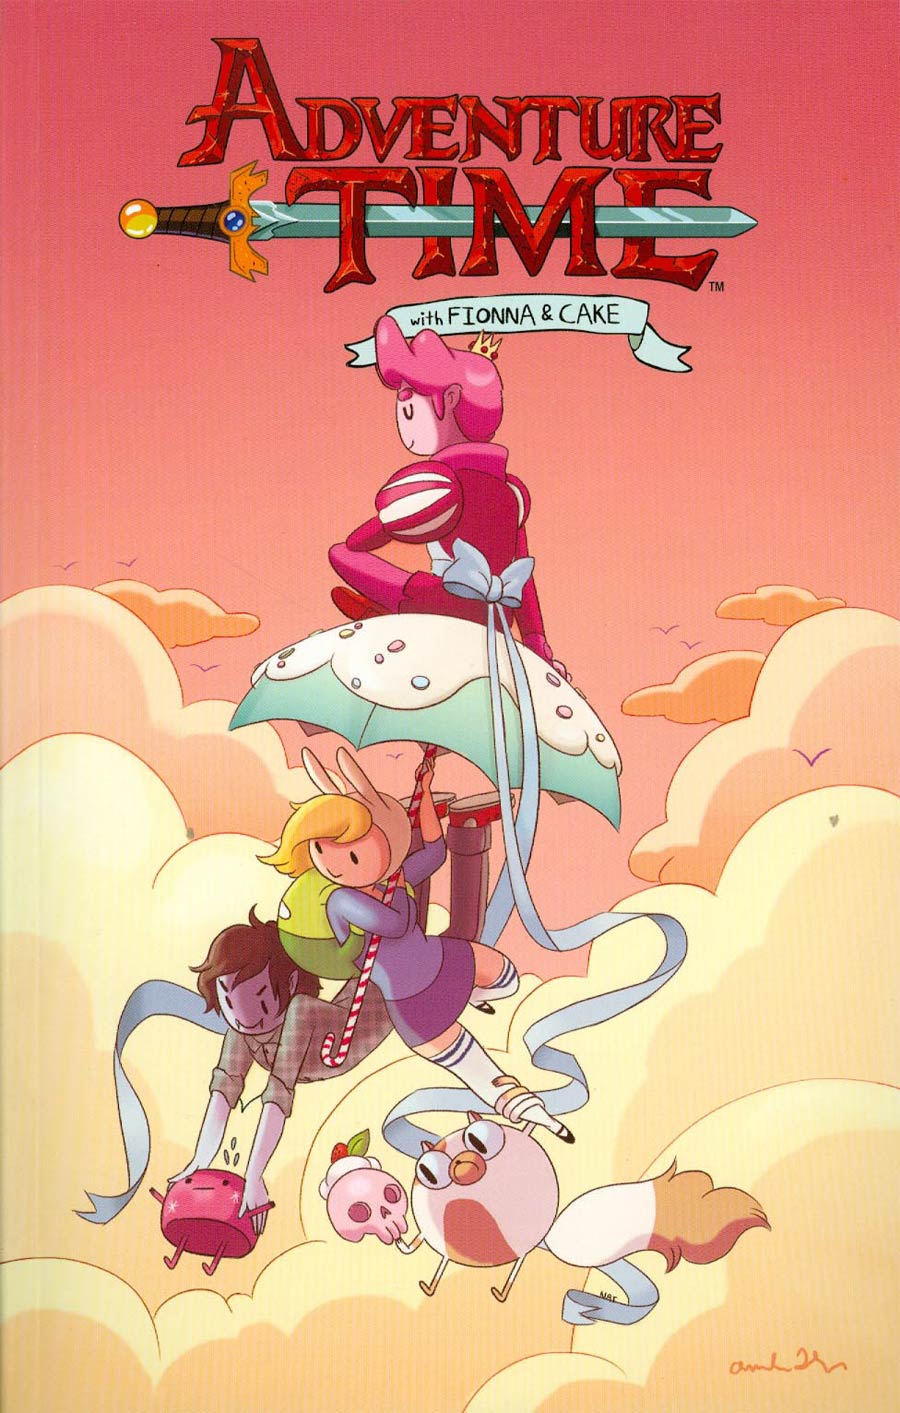 Adventure Time With Fionna & Cake TP